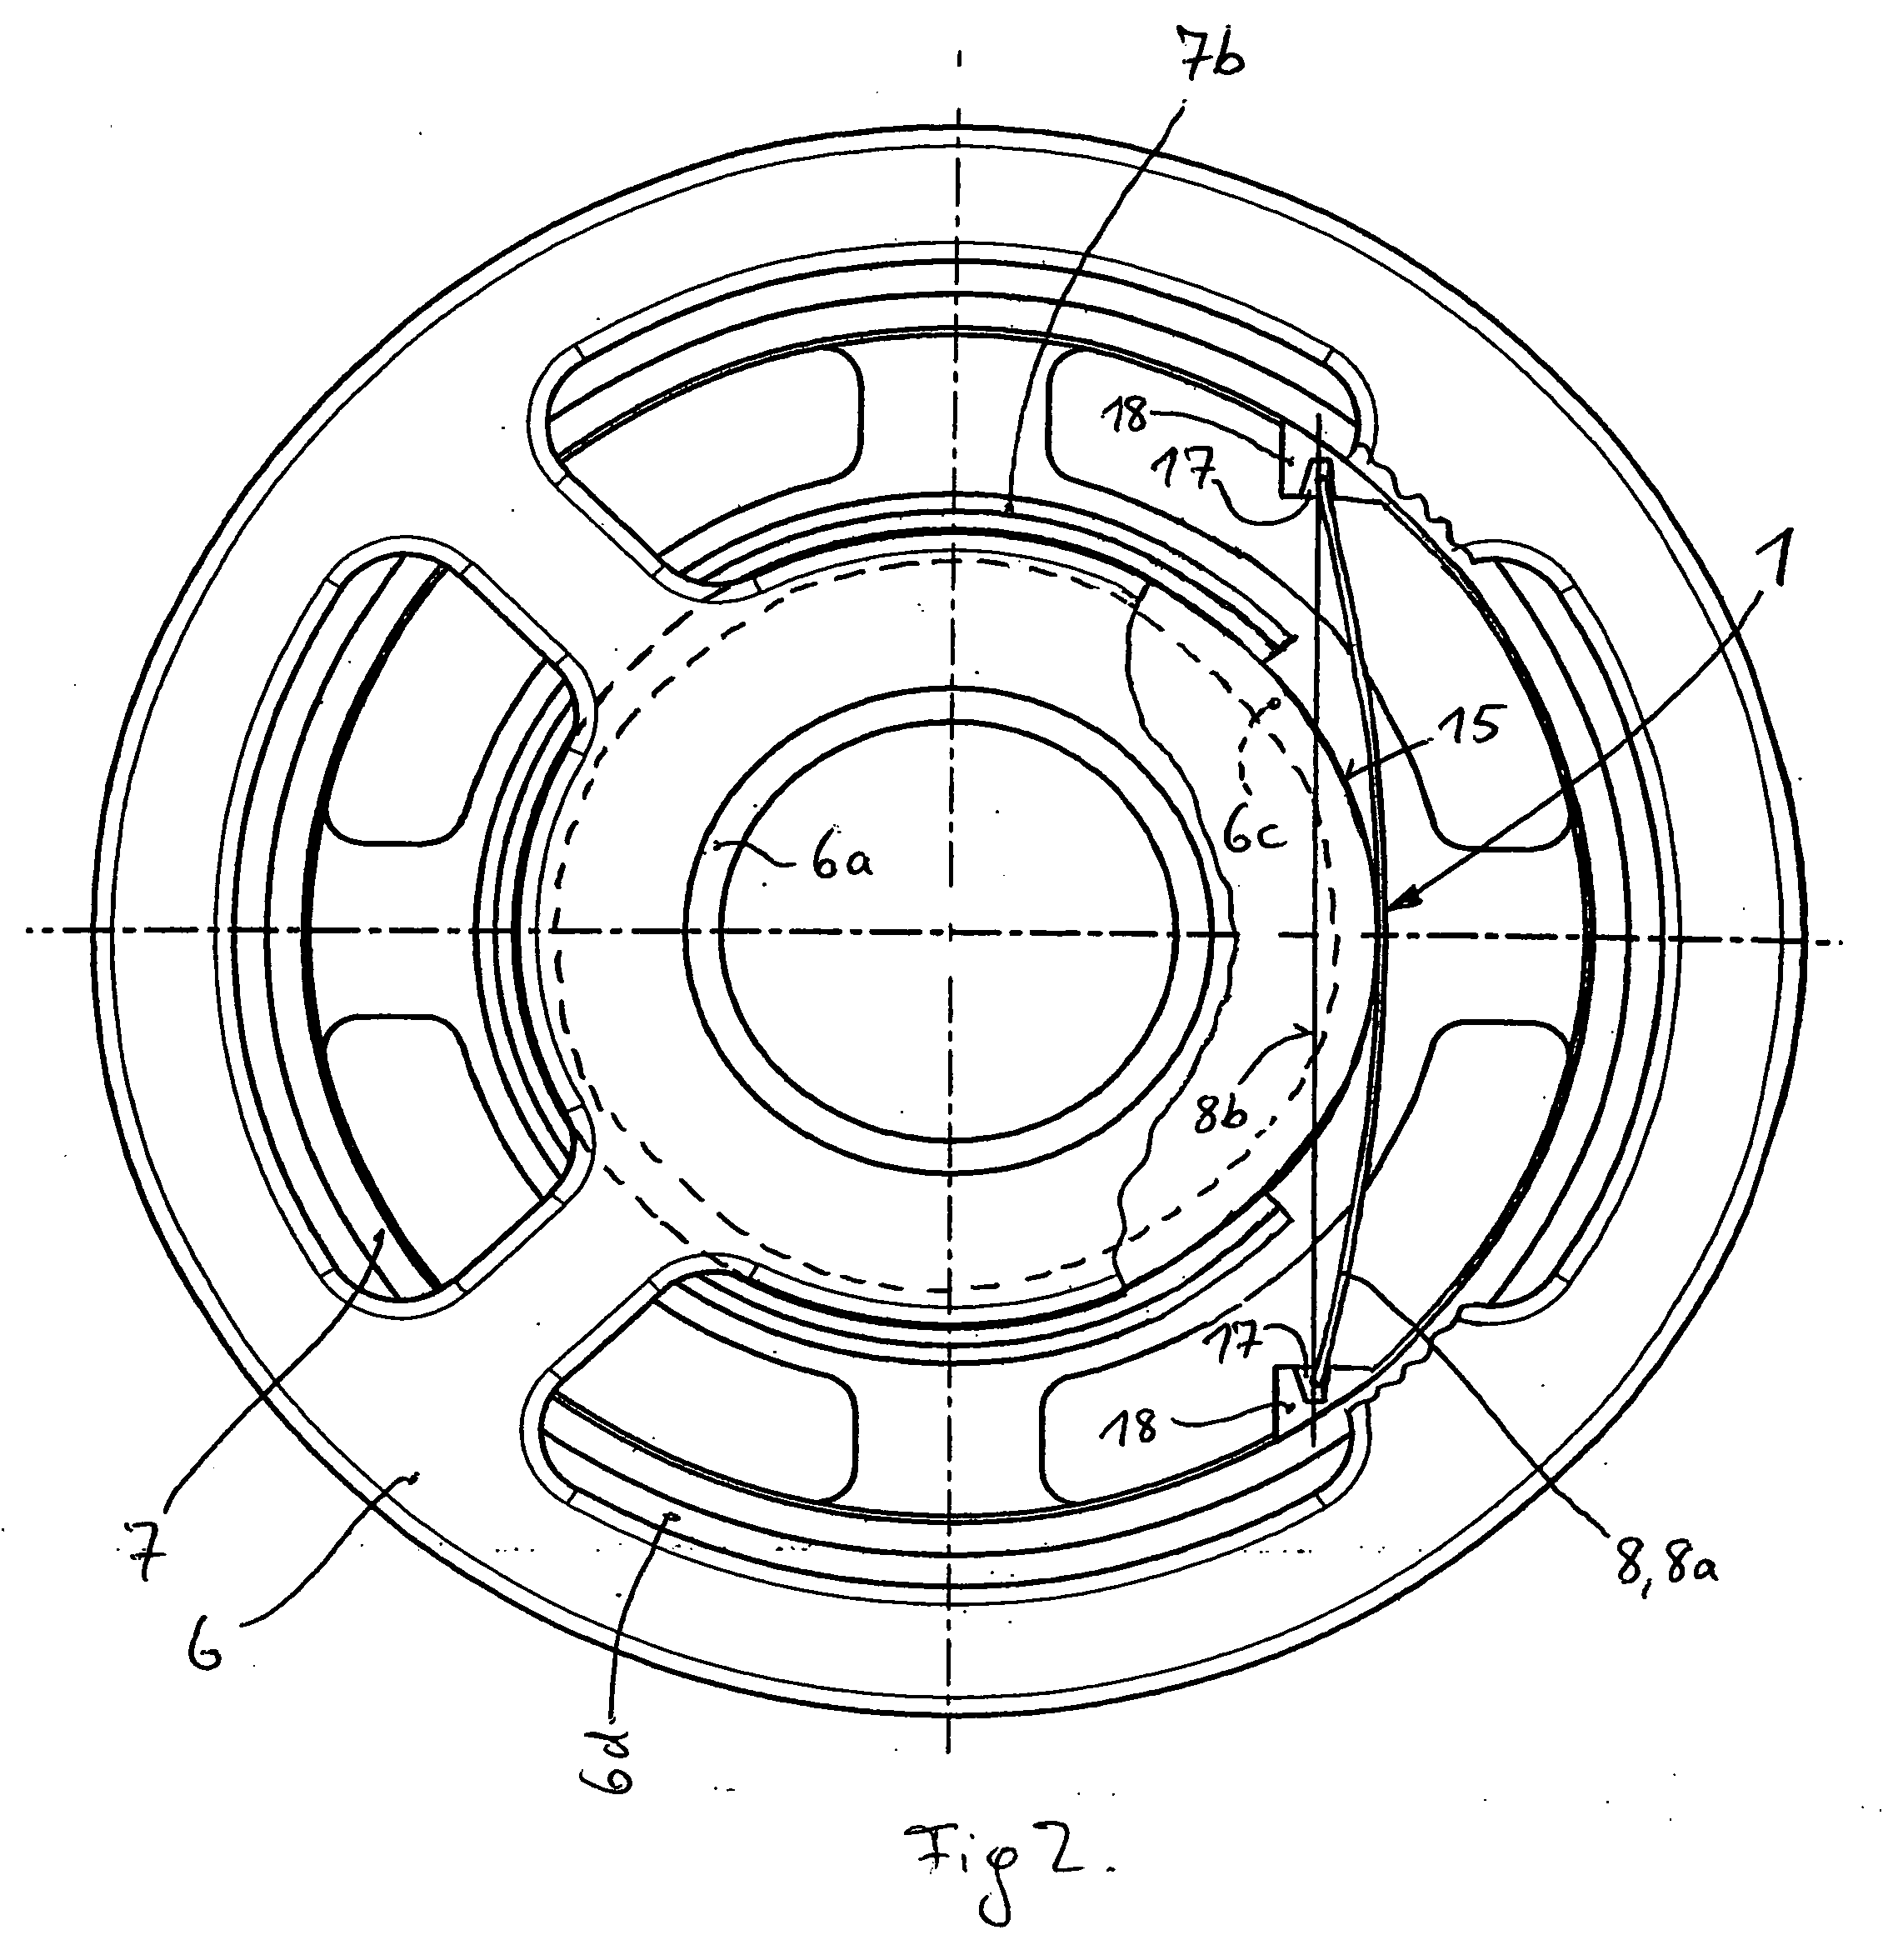 Frictional clutch for torque-restricted torsional power transmission between two reels of a hand-held device